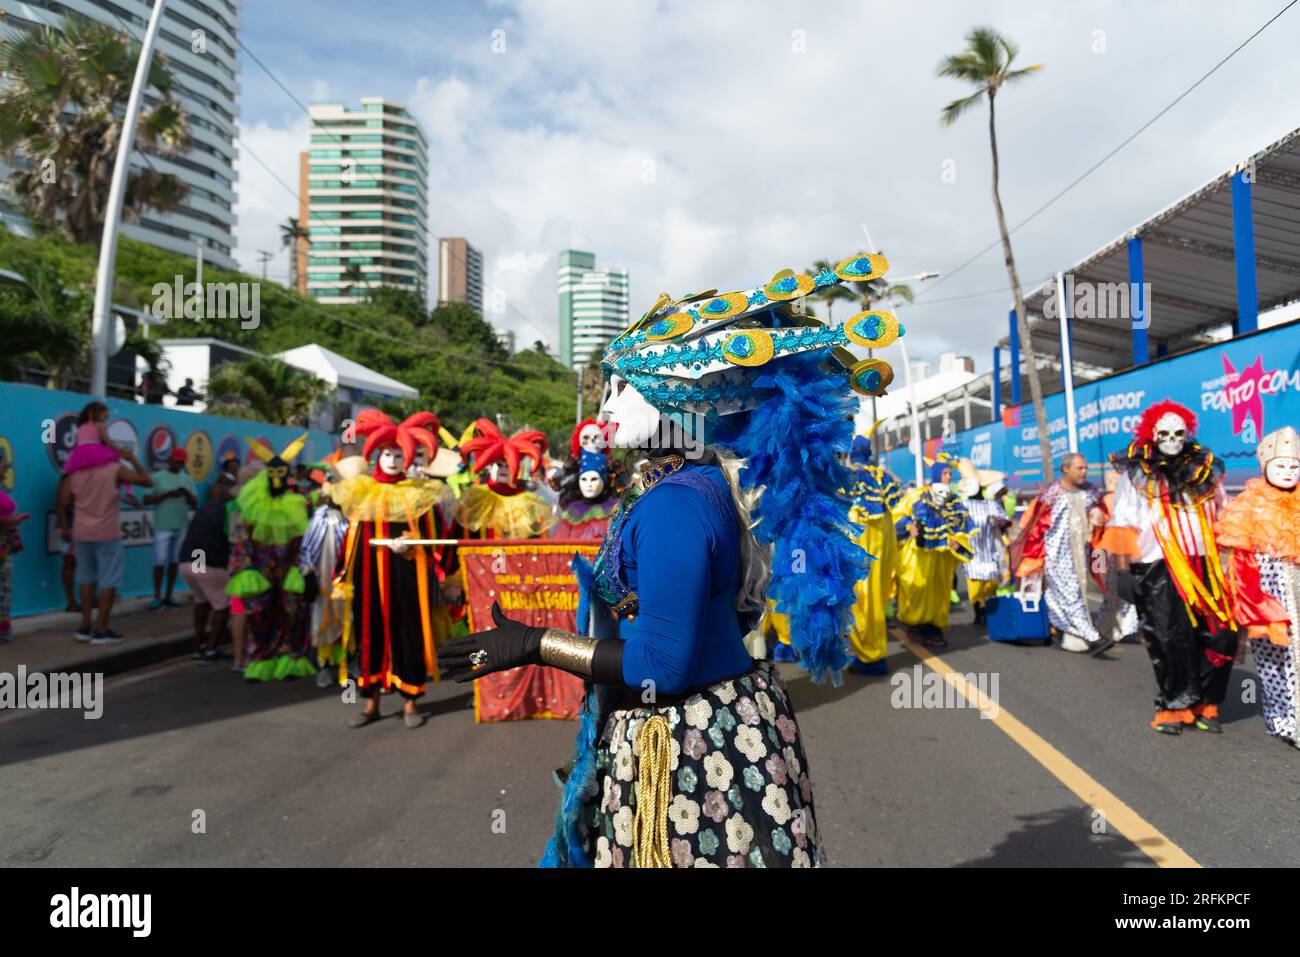 Salvador, Bahia, Brazil - February 11, 2023: Group of Venetian-style  masquerades are seen parading in Fuzue, pre-carnival in Salvador, Bahia, Brazil  Stock Photo - Alamy